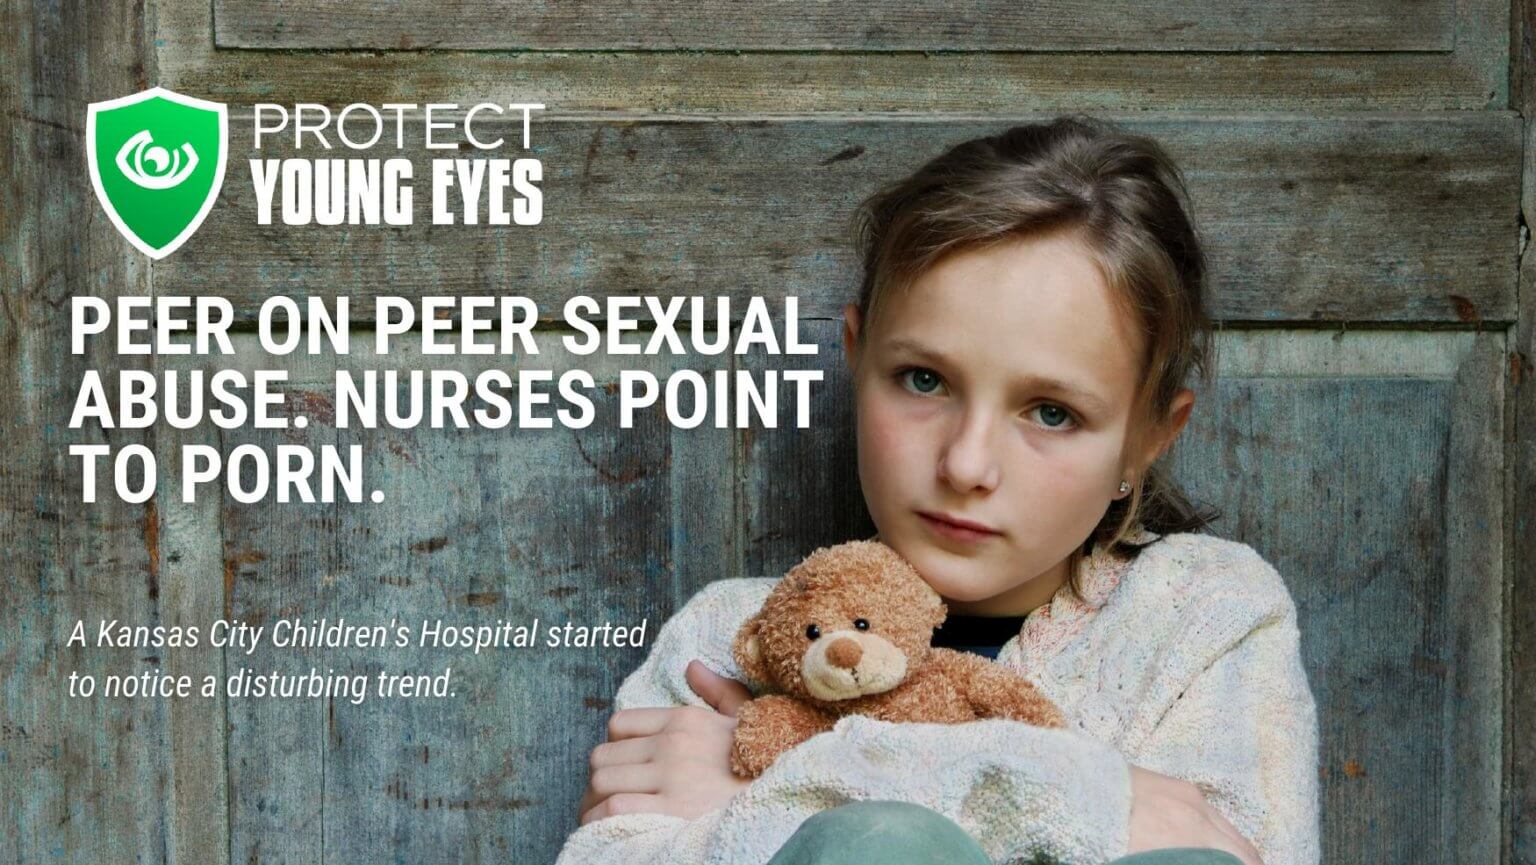 PeeronPeer Sexual Abuse Nurses Point To Porn Protect Young Eyes